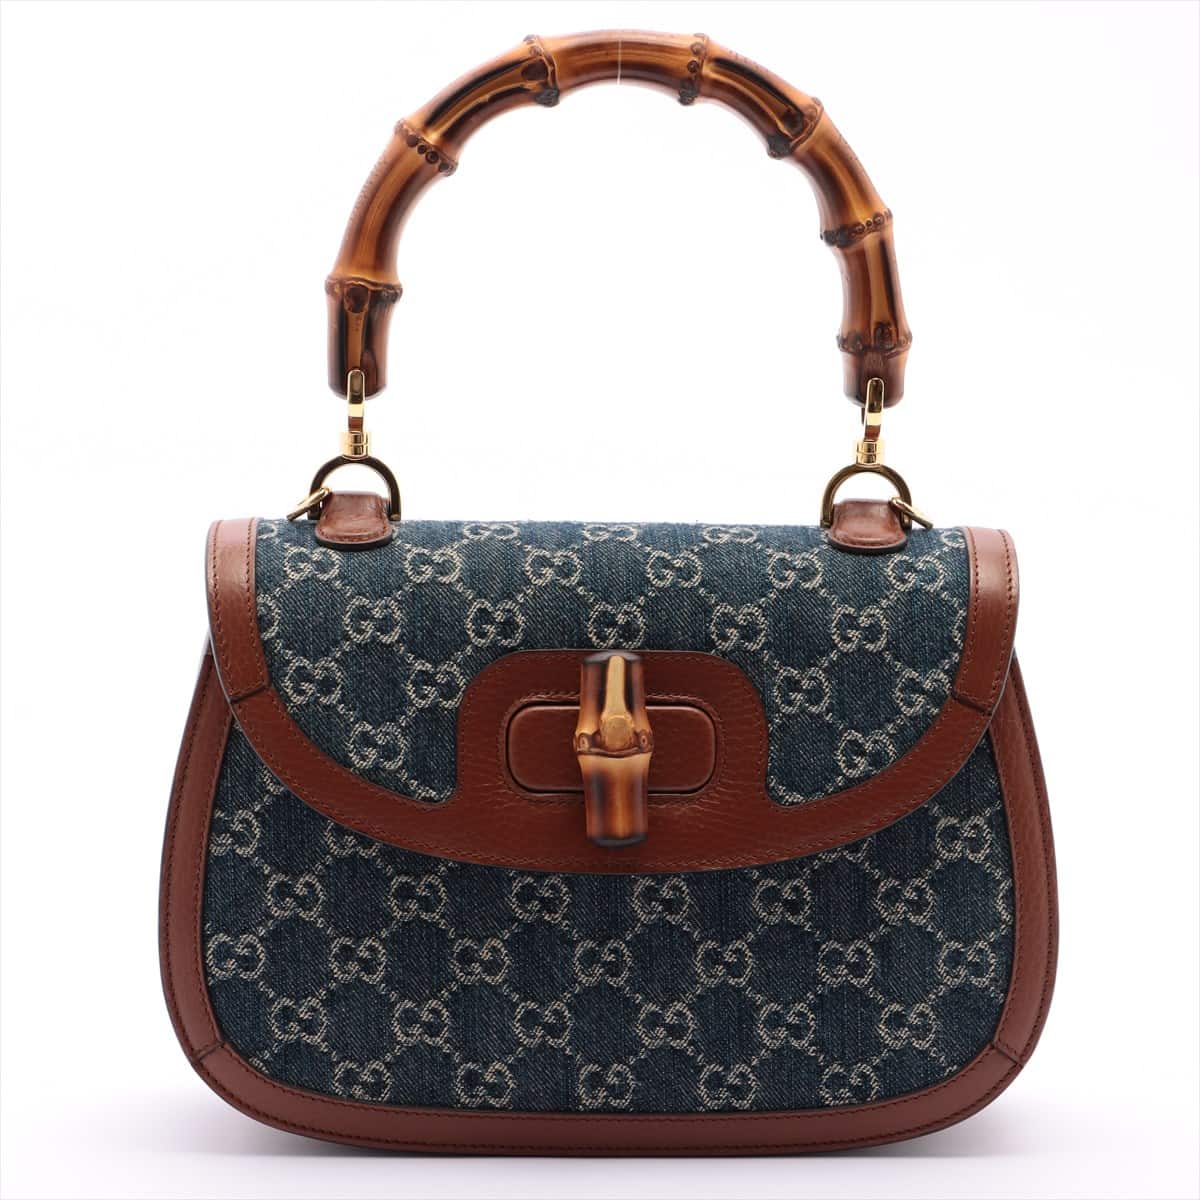 Gucci Bamboo Denim & leather 2way handbag Blue 517337 With mirror Limited to Japan